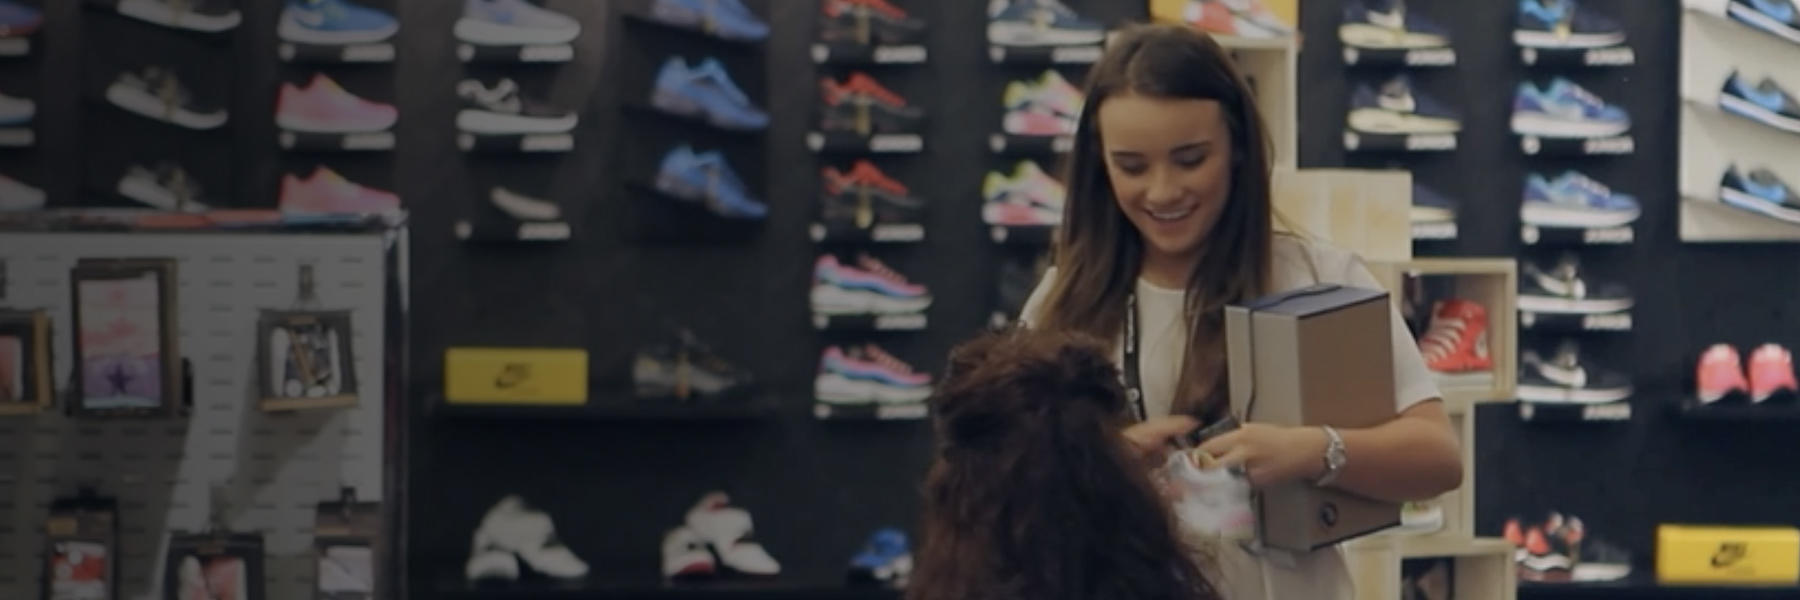 A smoother shopping experience with a mobile point-of-sale with JD Sports | Thoughtworks 